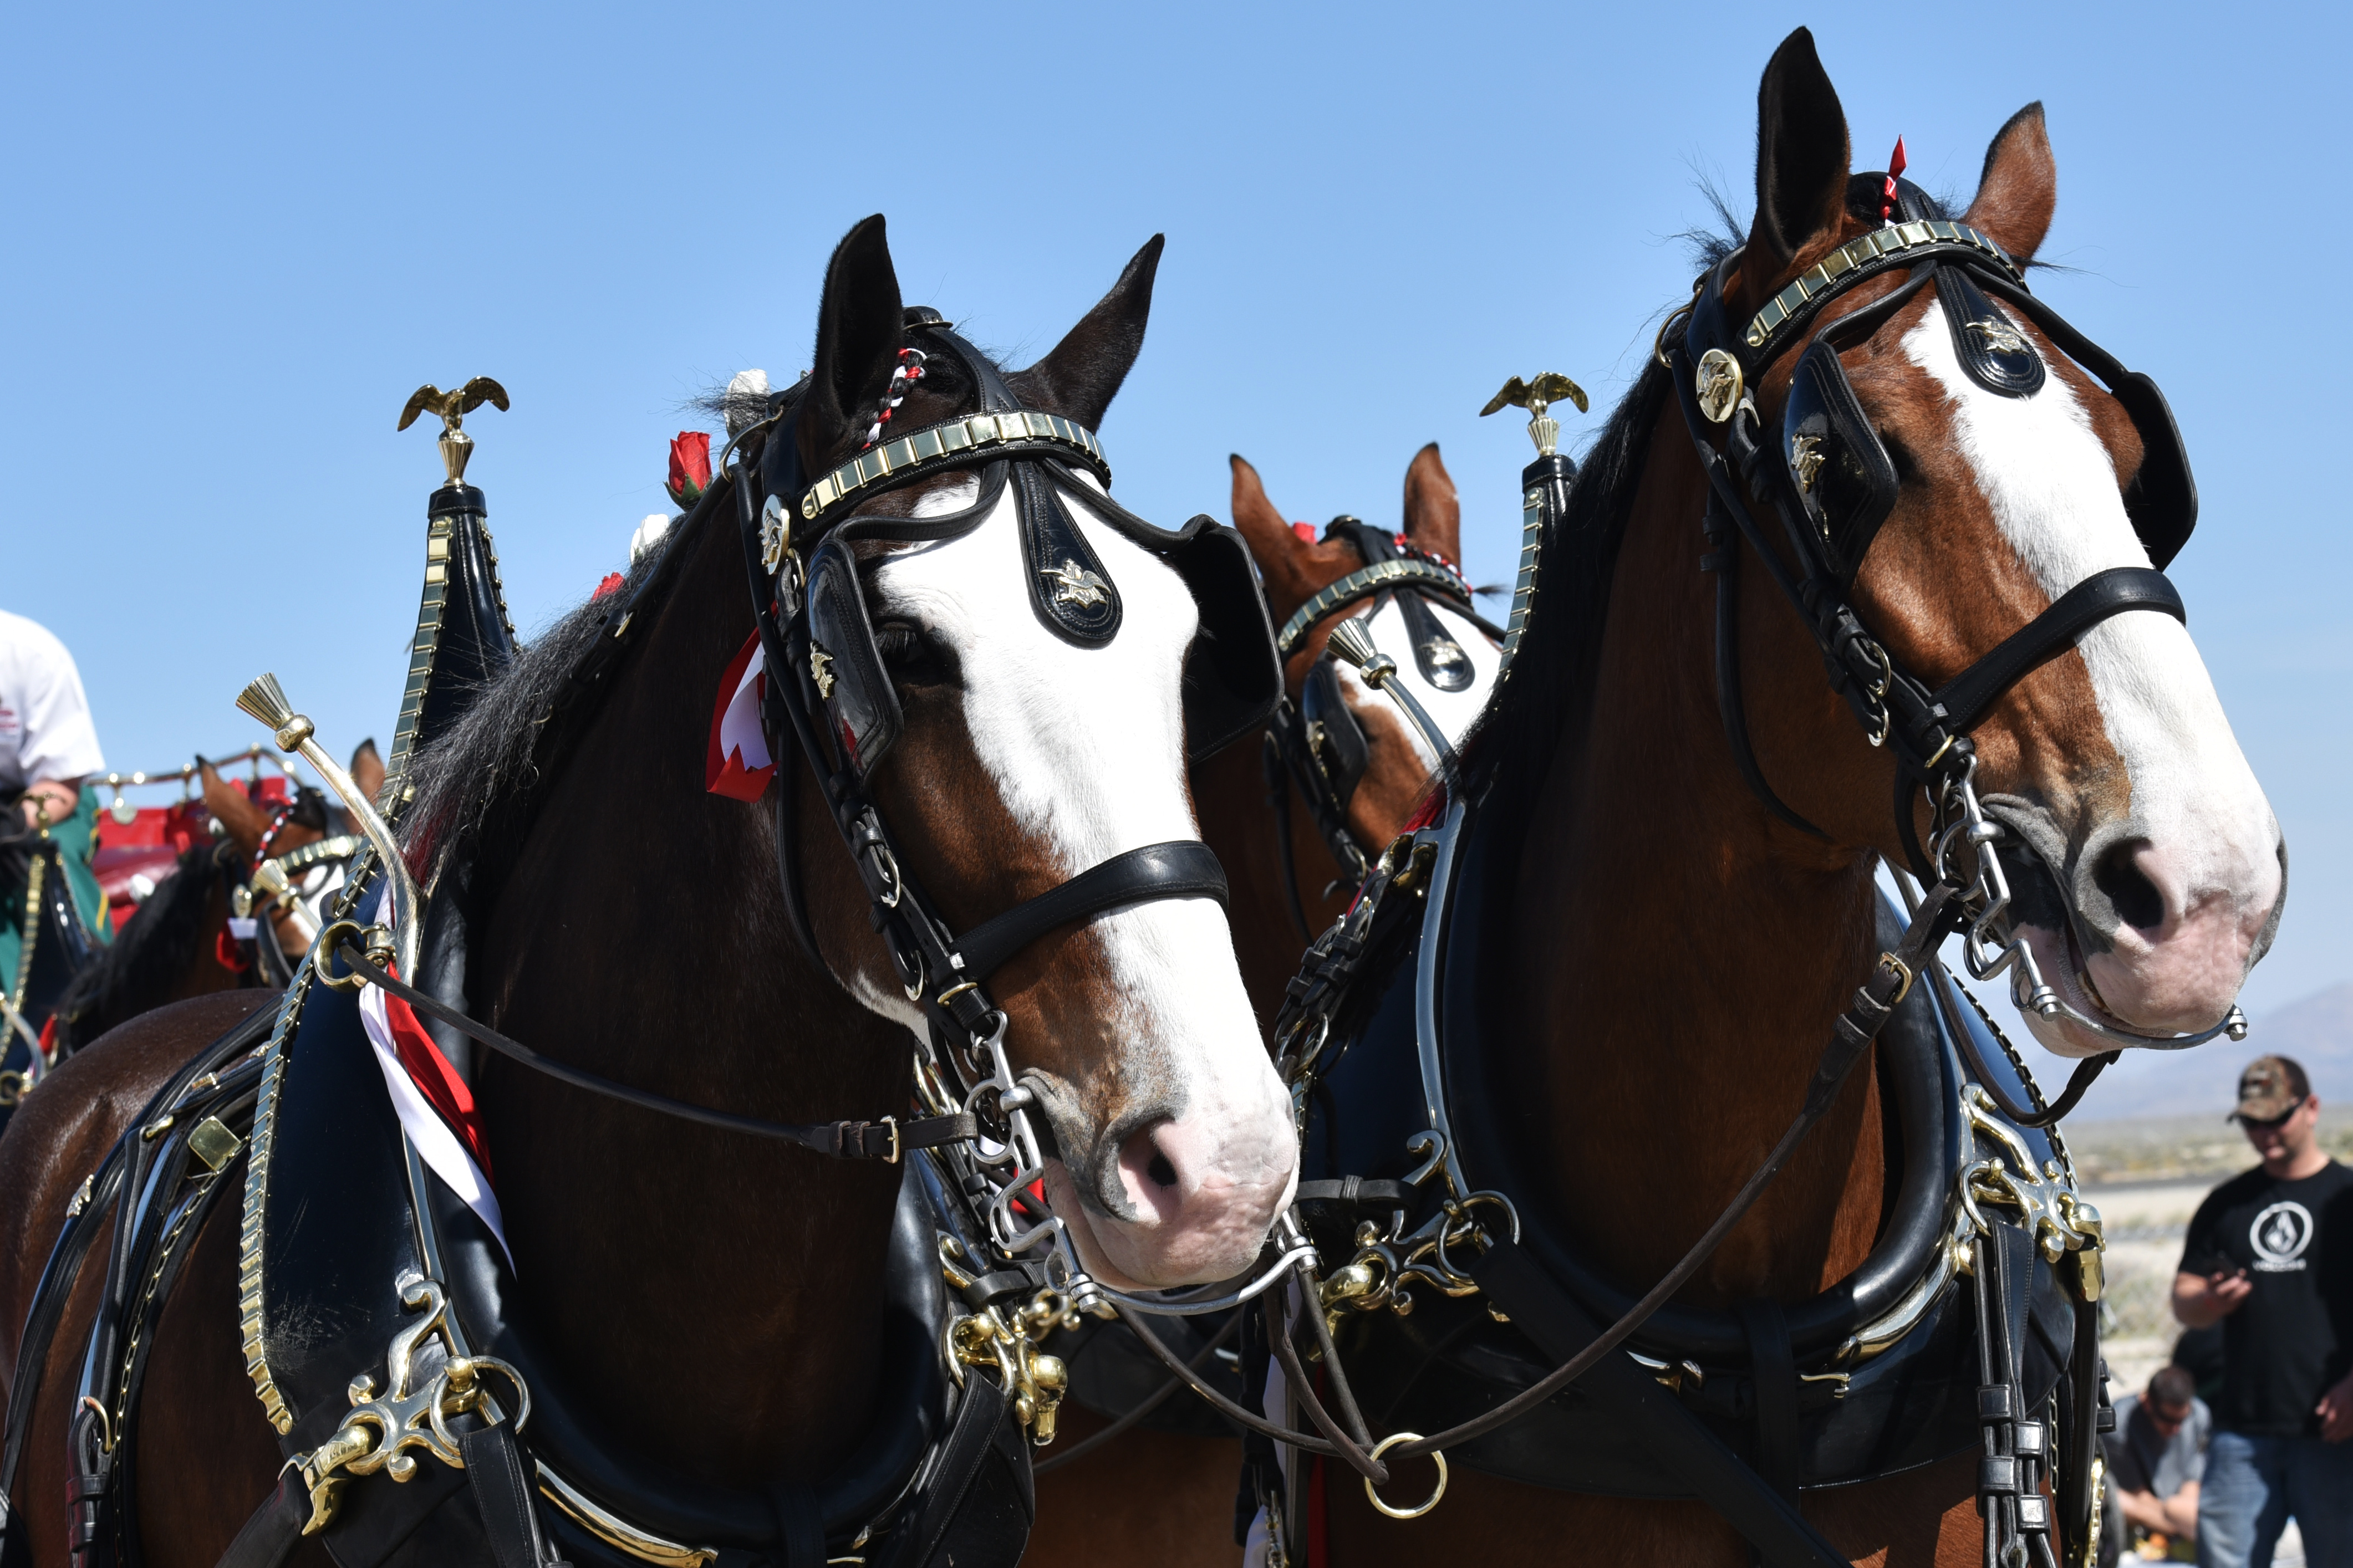 clydesdales by Shawna